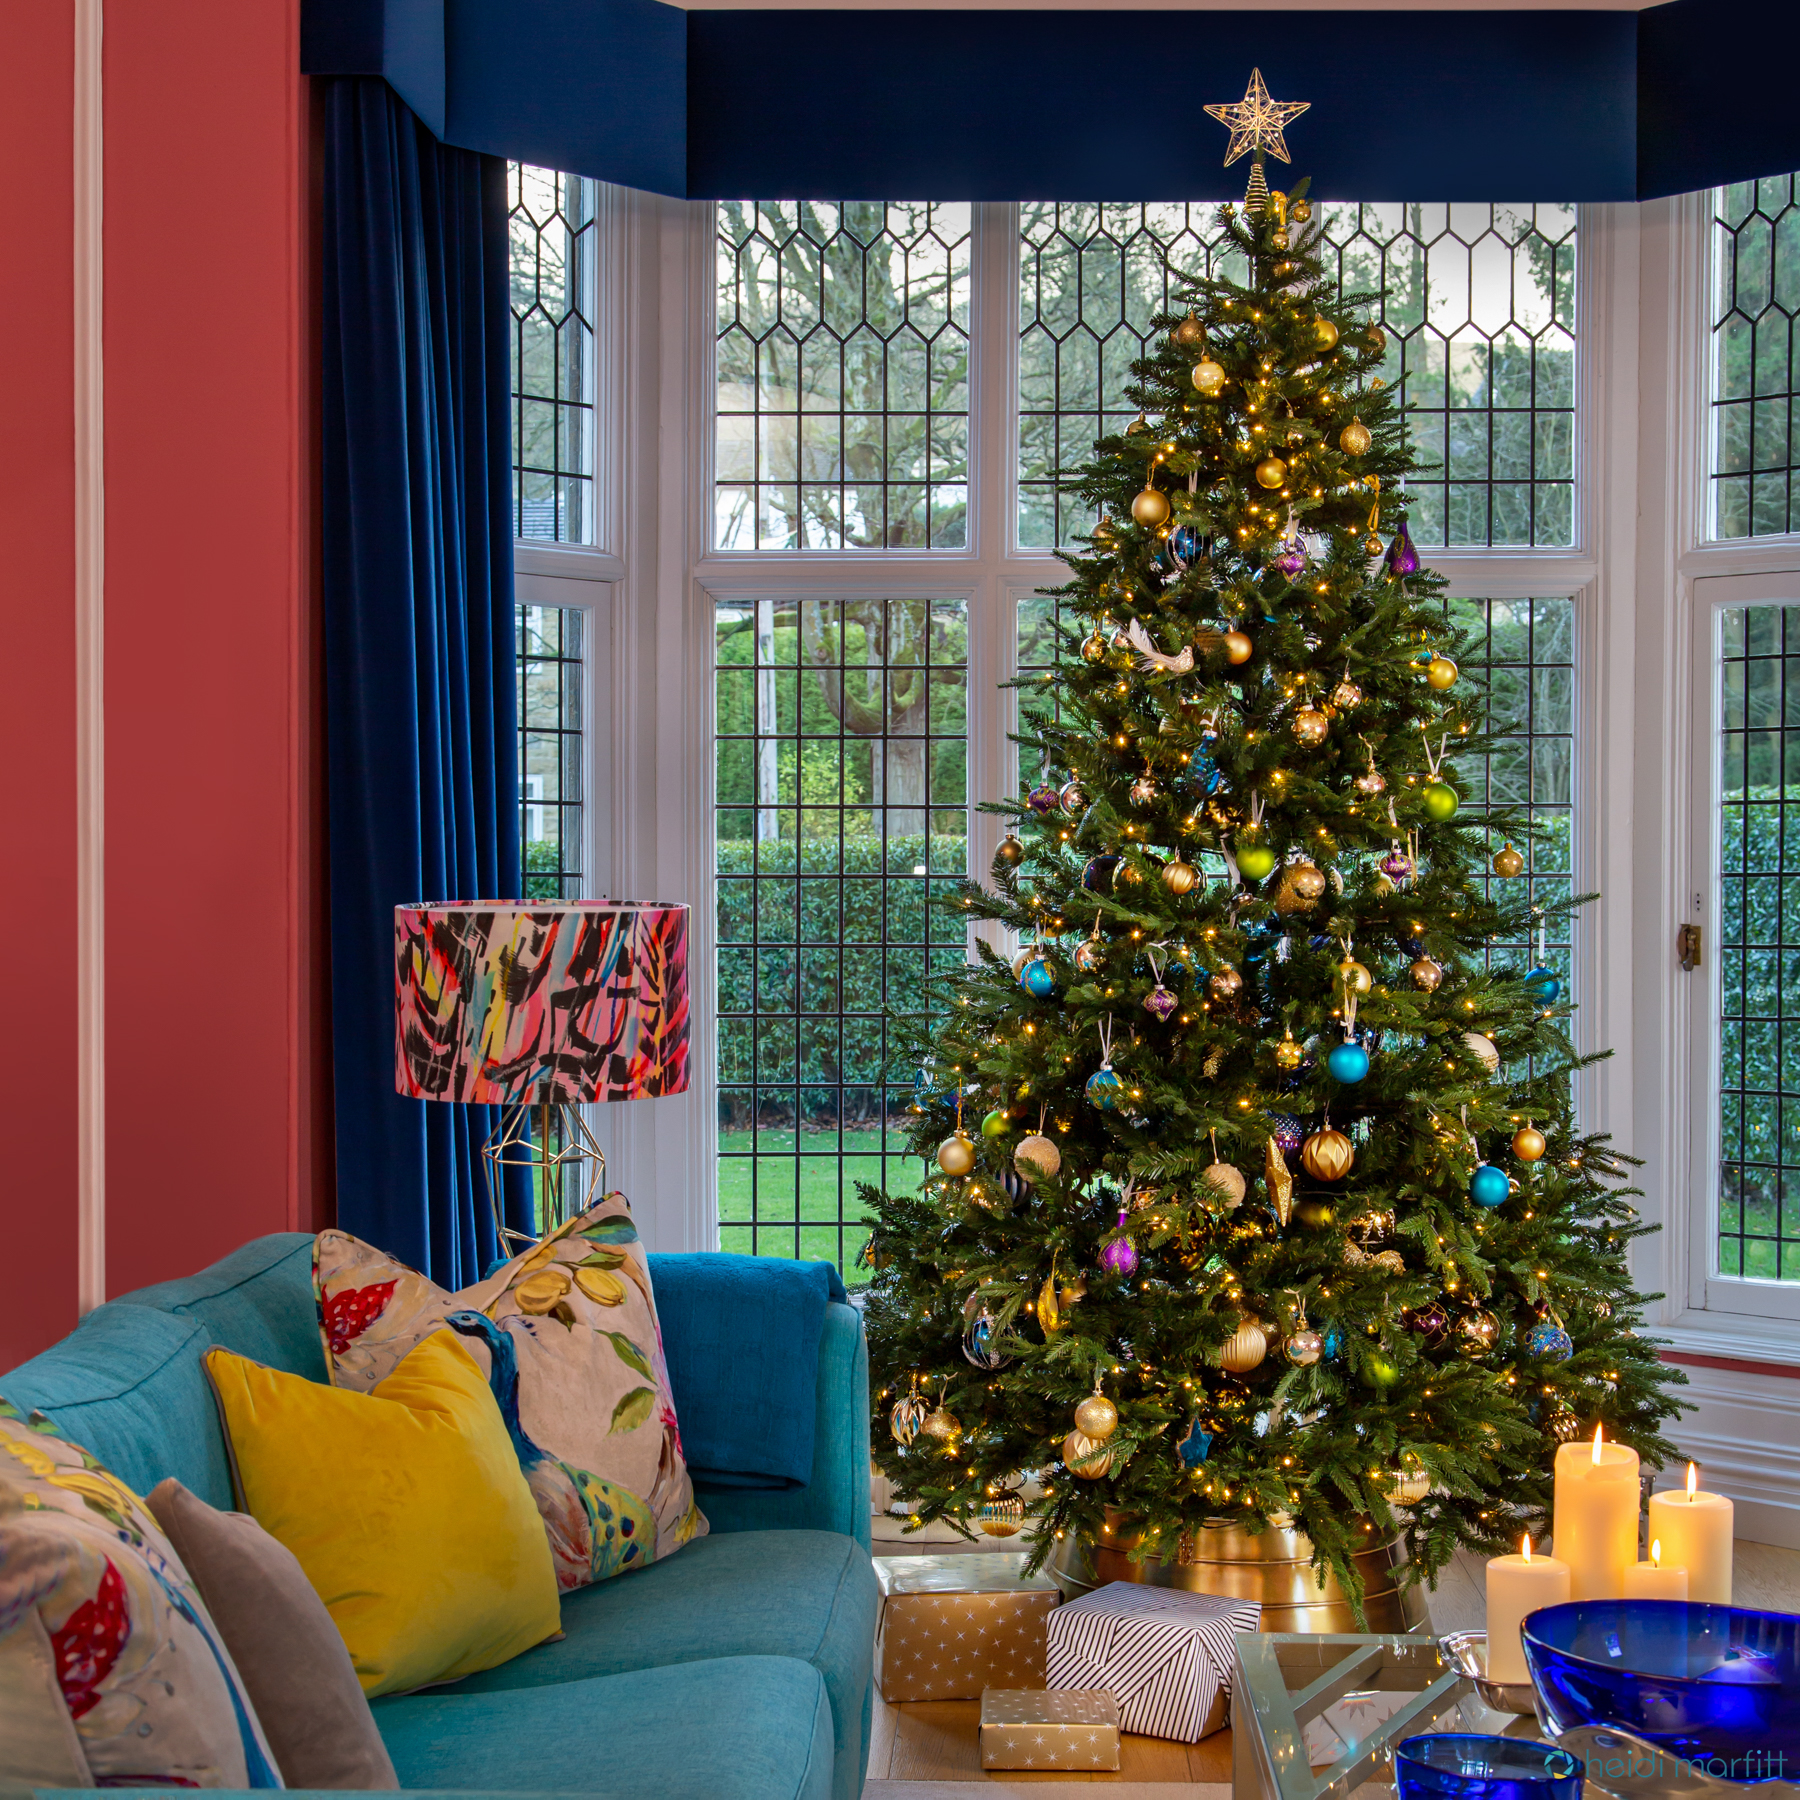 Living room with decorated Christmas tree.